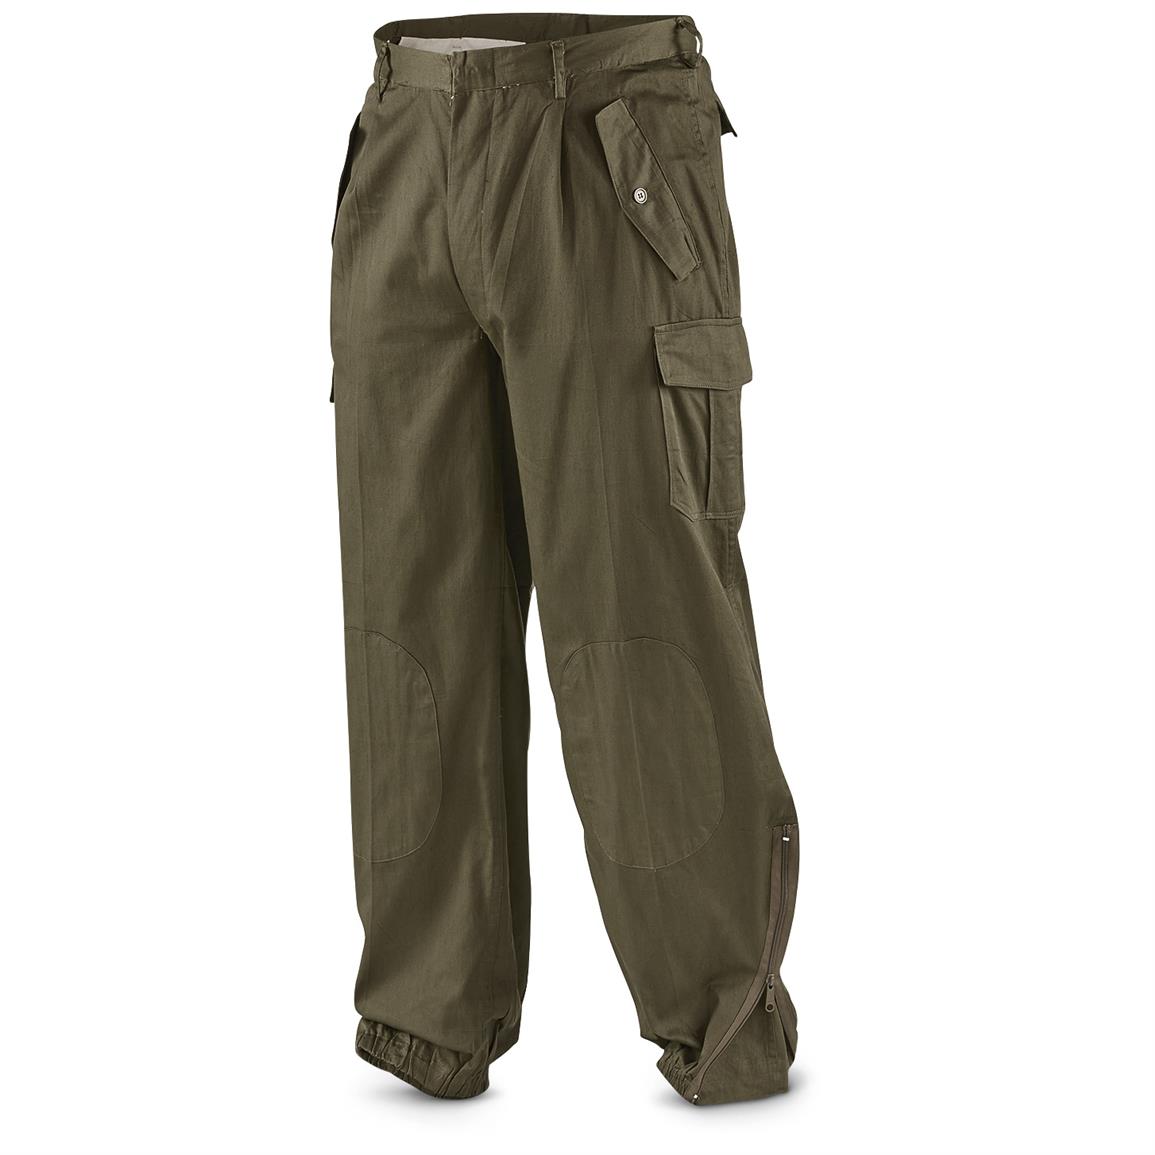 Military-style Olive Drab BDU Pants - 637211, Tactical Clothing at ...